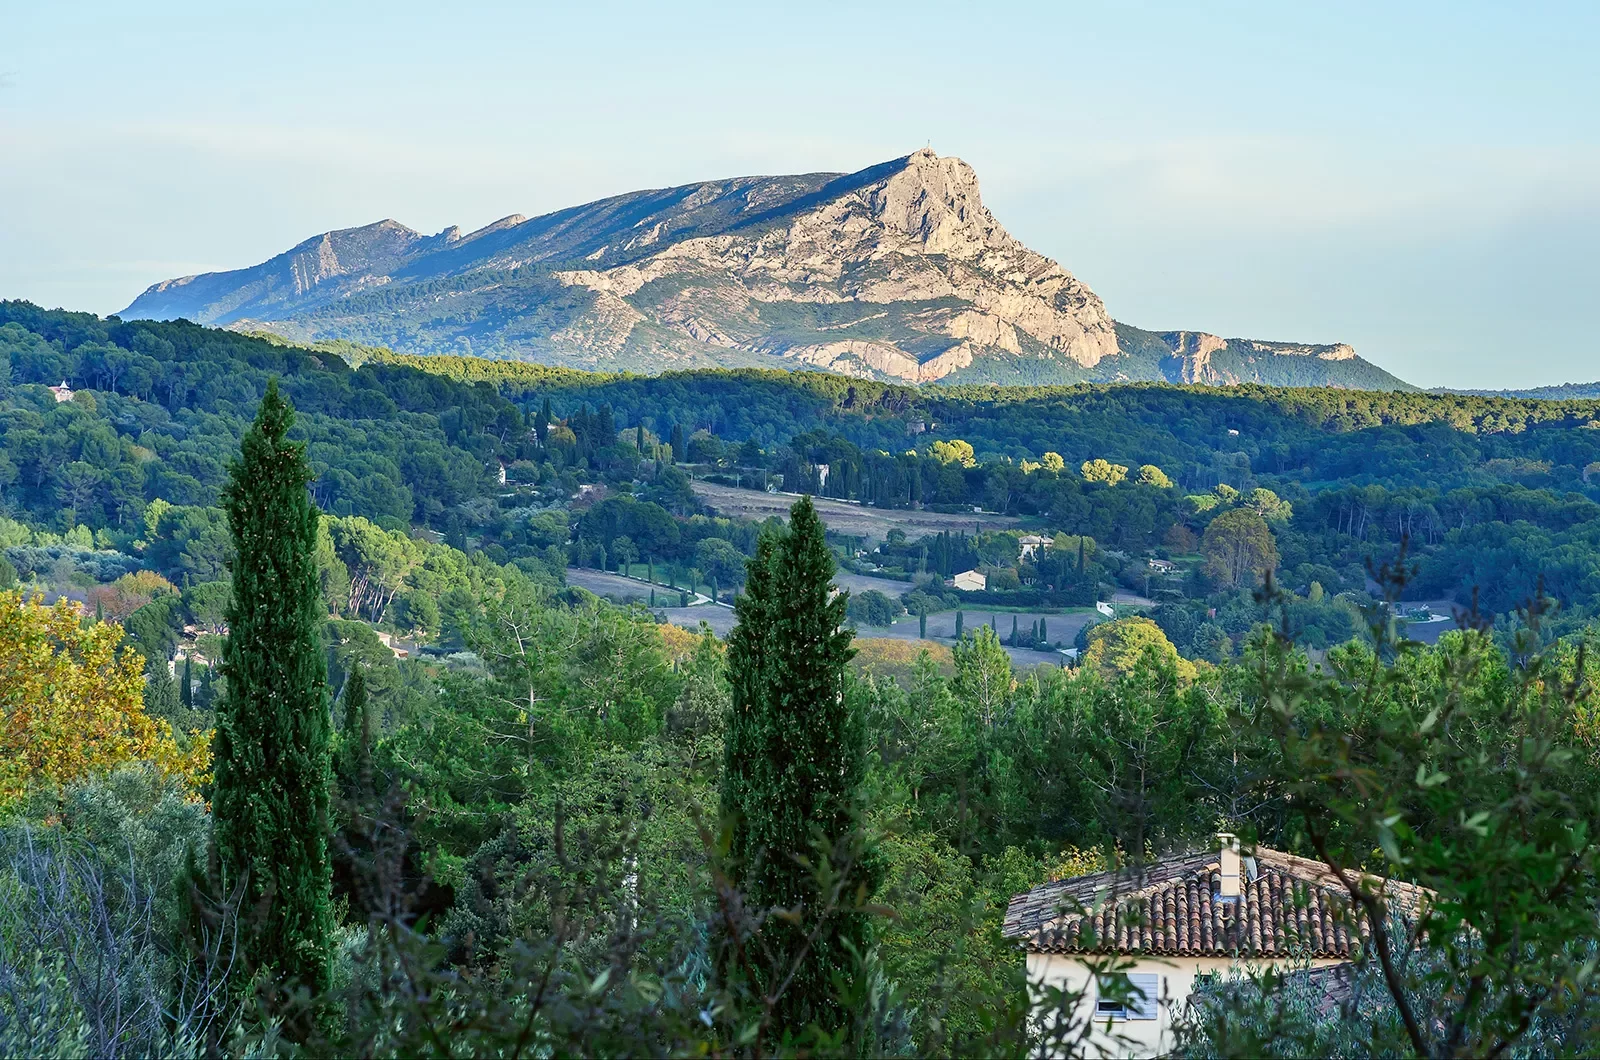 Panoramic View of the Sainte Victoire Mountain from the Terrain of the Painters Aix-en-Provence, France